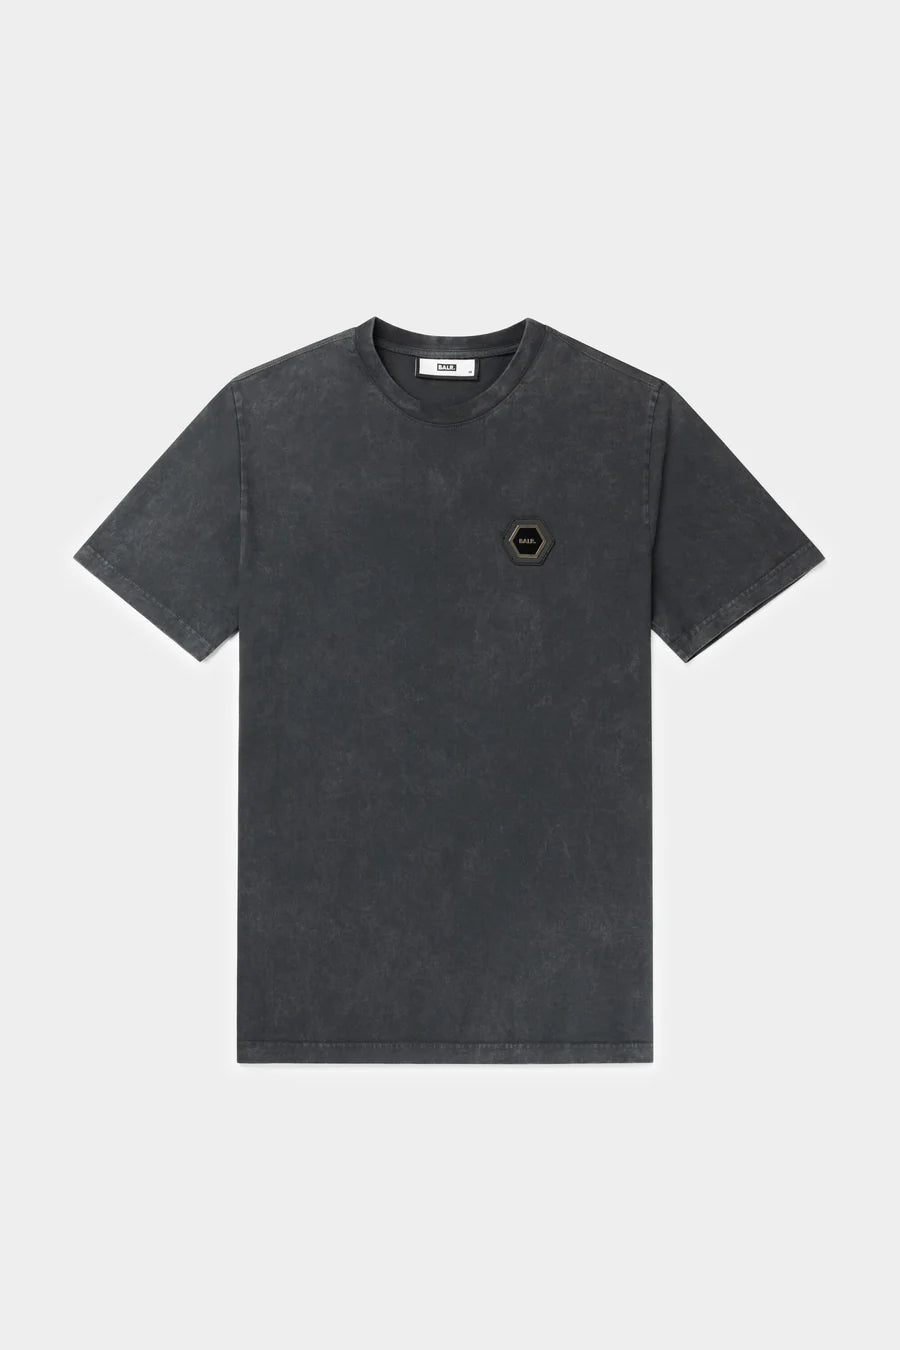 D13 STRAIGHT WASHED T SHIRT WASHED BLACK